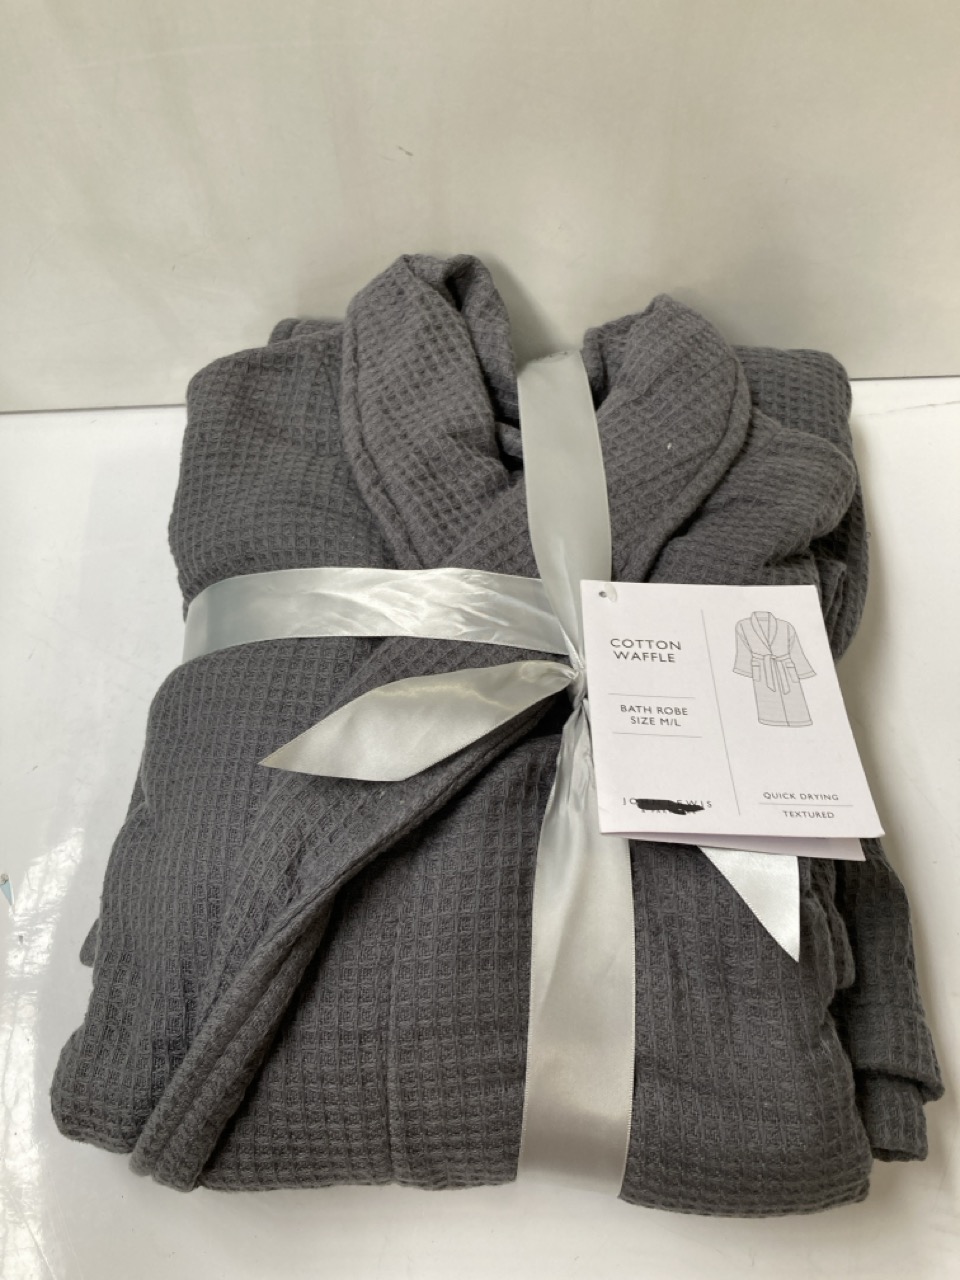 JOHN LEWIS GREY COTTON WAFFLE BATH ROBE SIZE M/L, TO ALSO INCLUDE A JOHN LEWIS LUXURY WOMENS DRESSING GROWN BLUE/GREEN